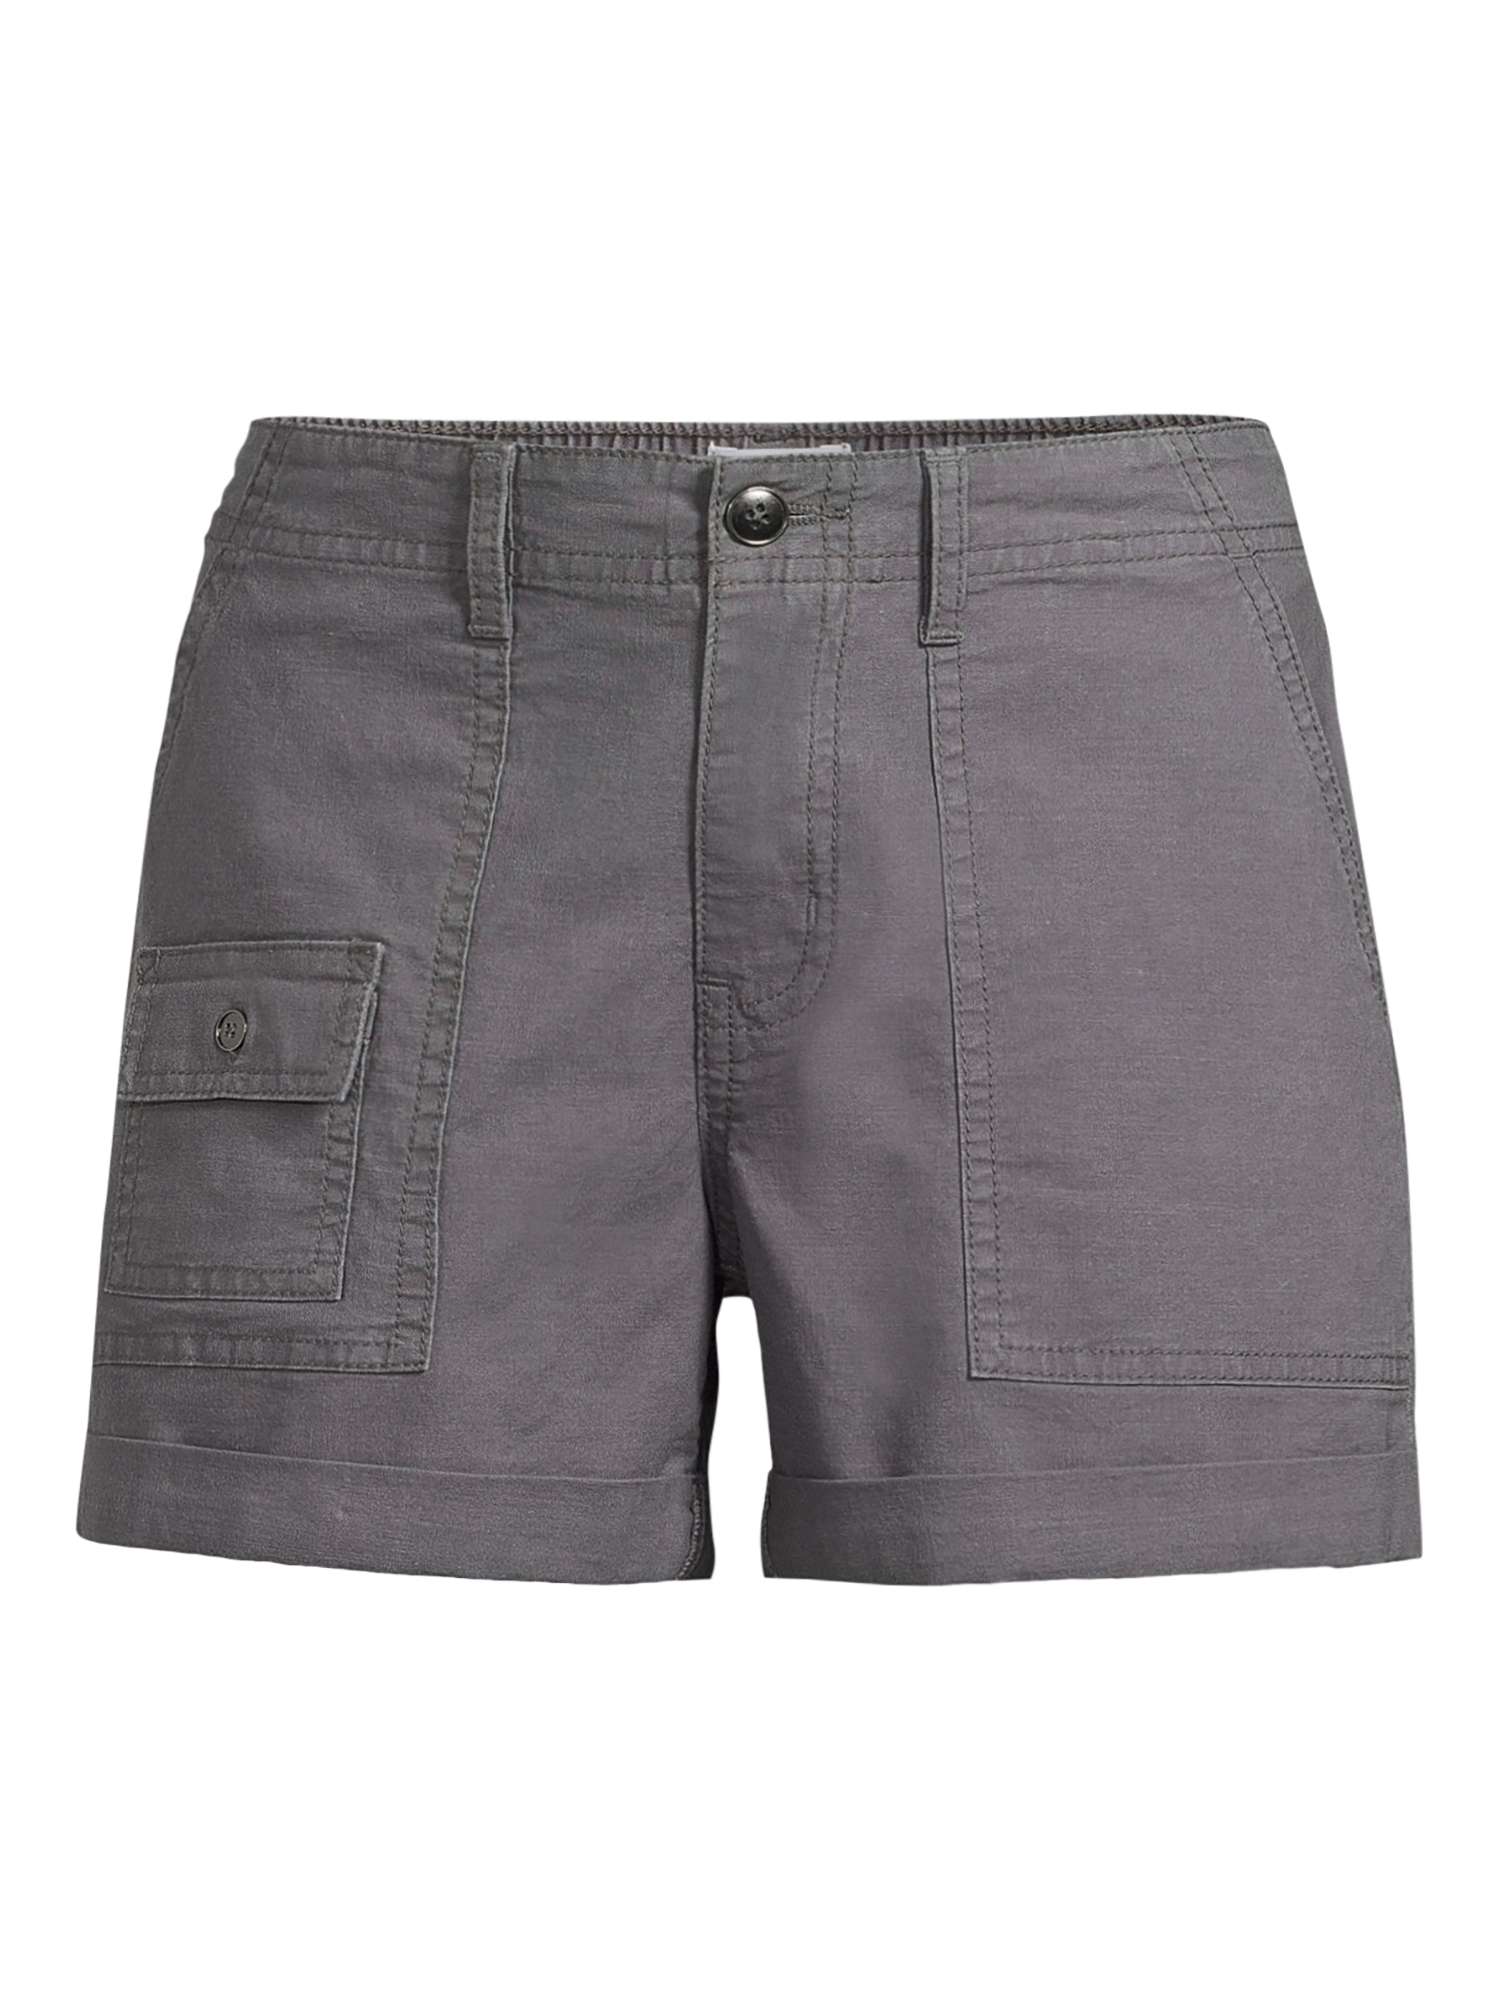 Time and Tru Women's and Women's Plus Utility Cuff Shorts, 4" Inseam, Sizes 2-20 - image 5 of 6